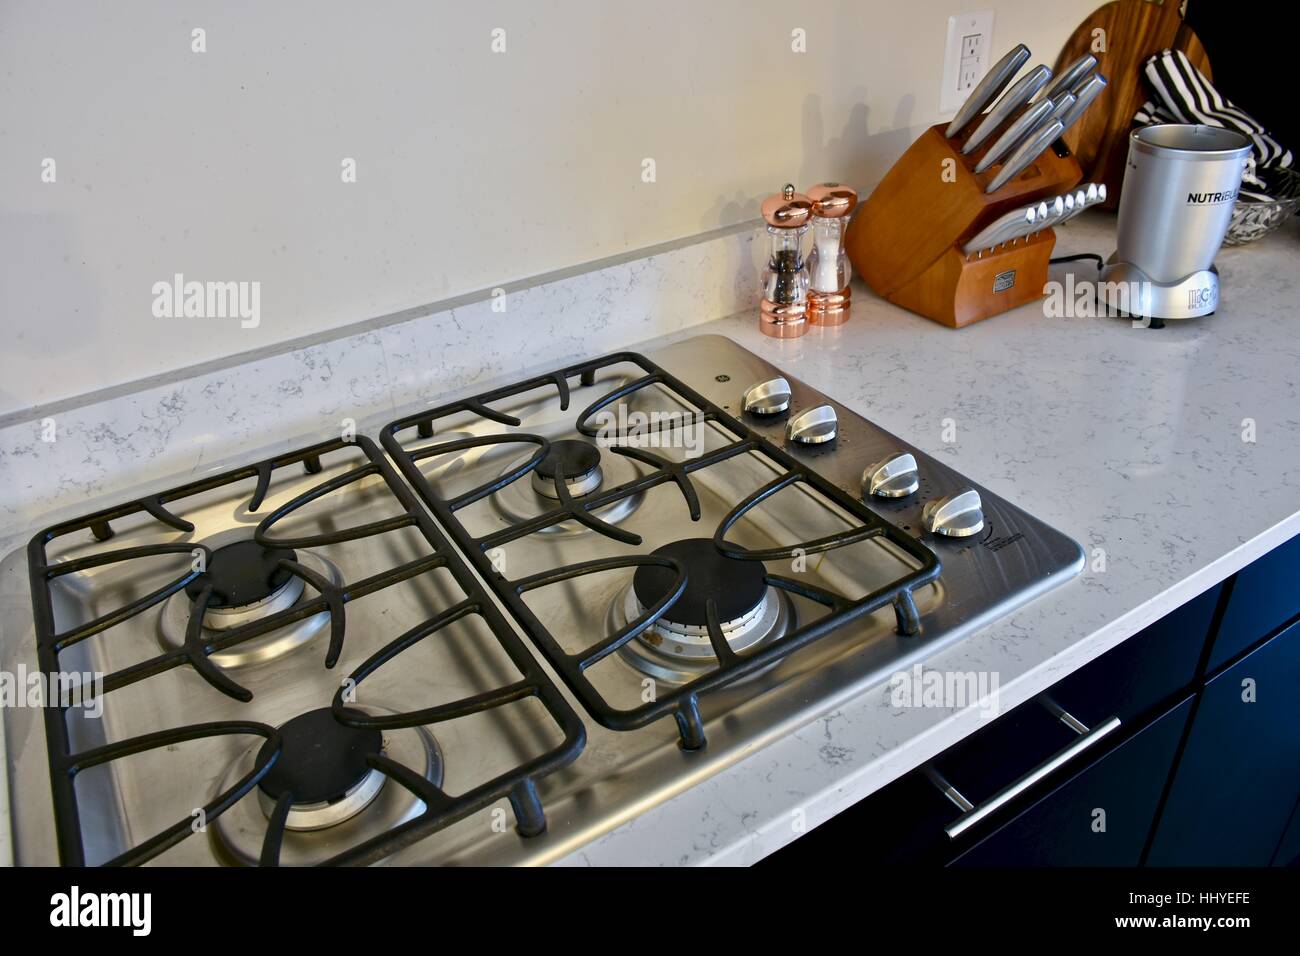 https://c8.alamy.com/comp/HHYEFE/white-marble-kitchen-counter-top-with-a-stove-in-a-modern-home-HHYEFE.jpg